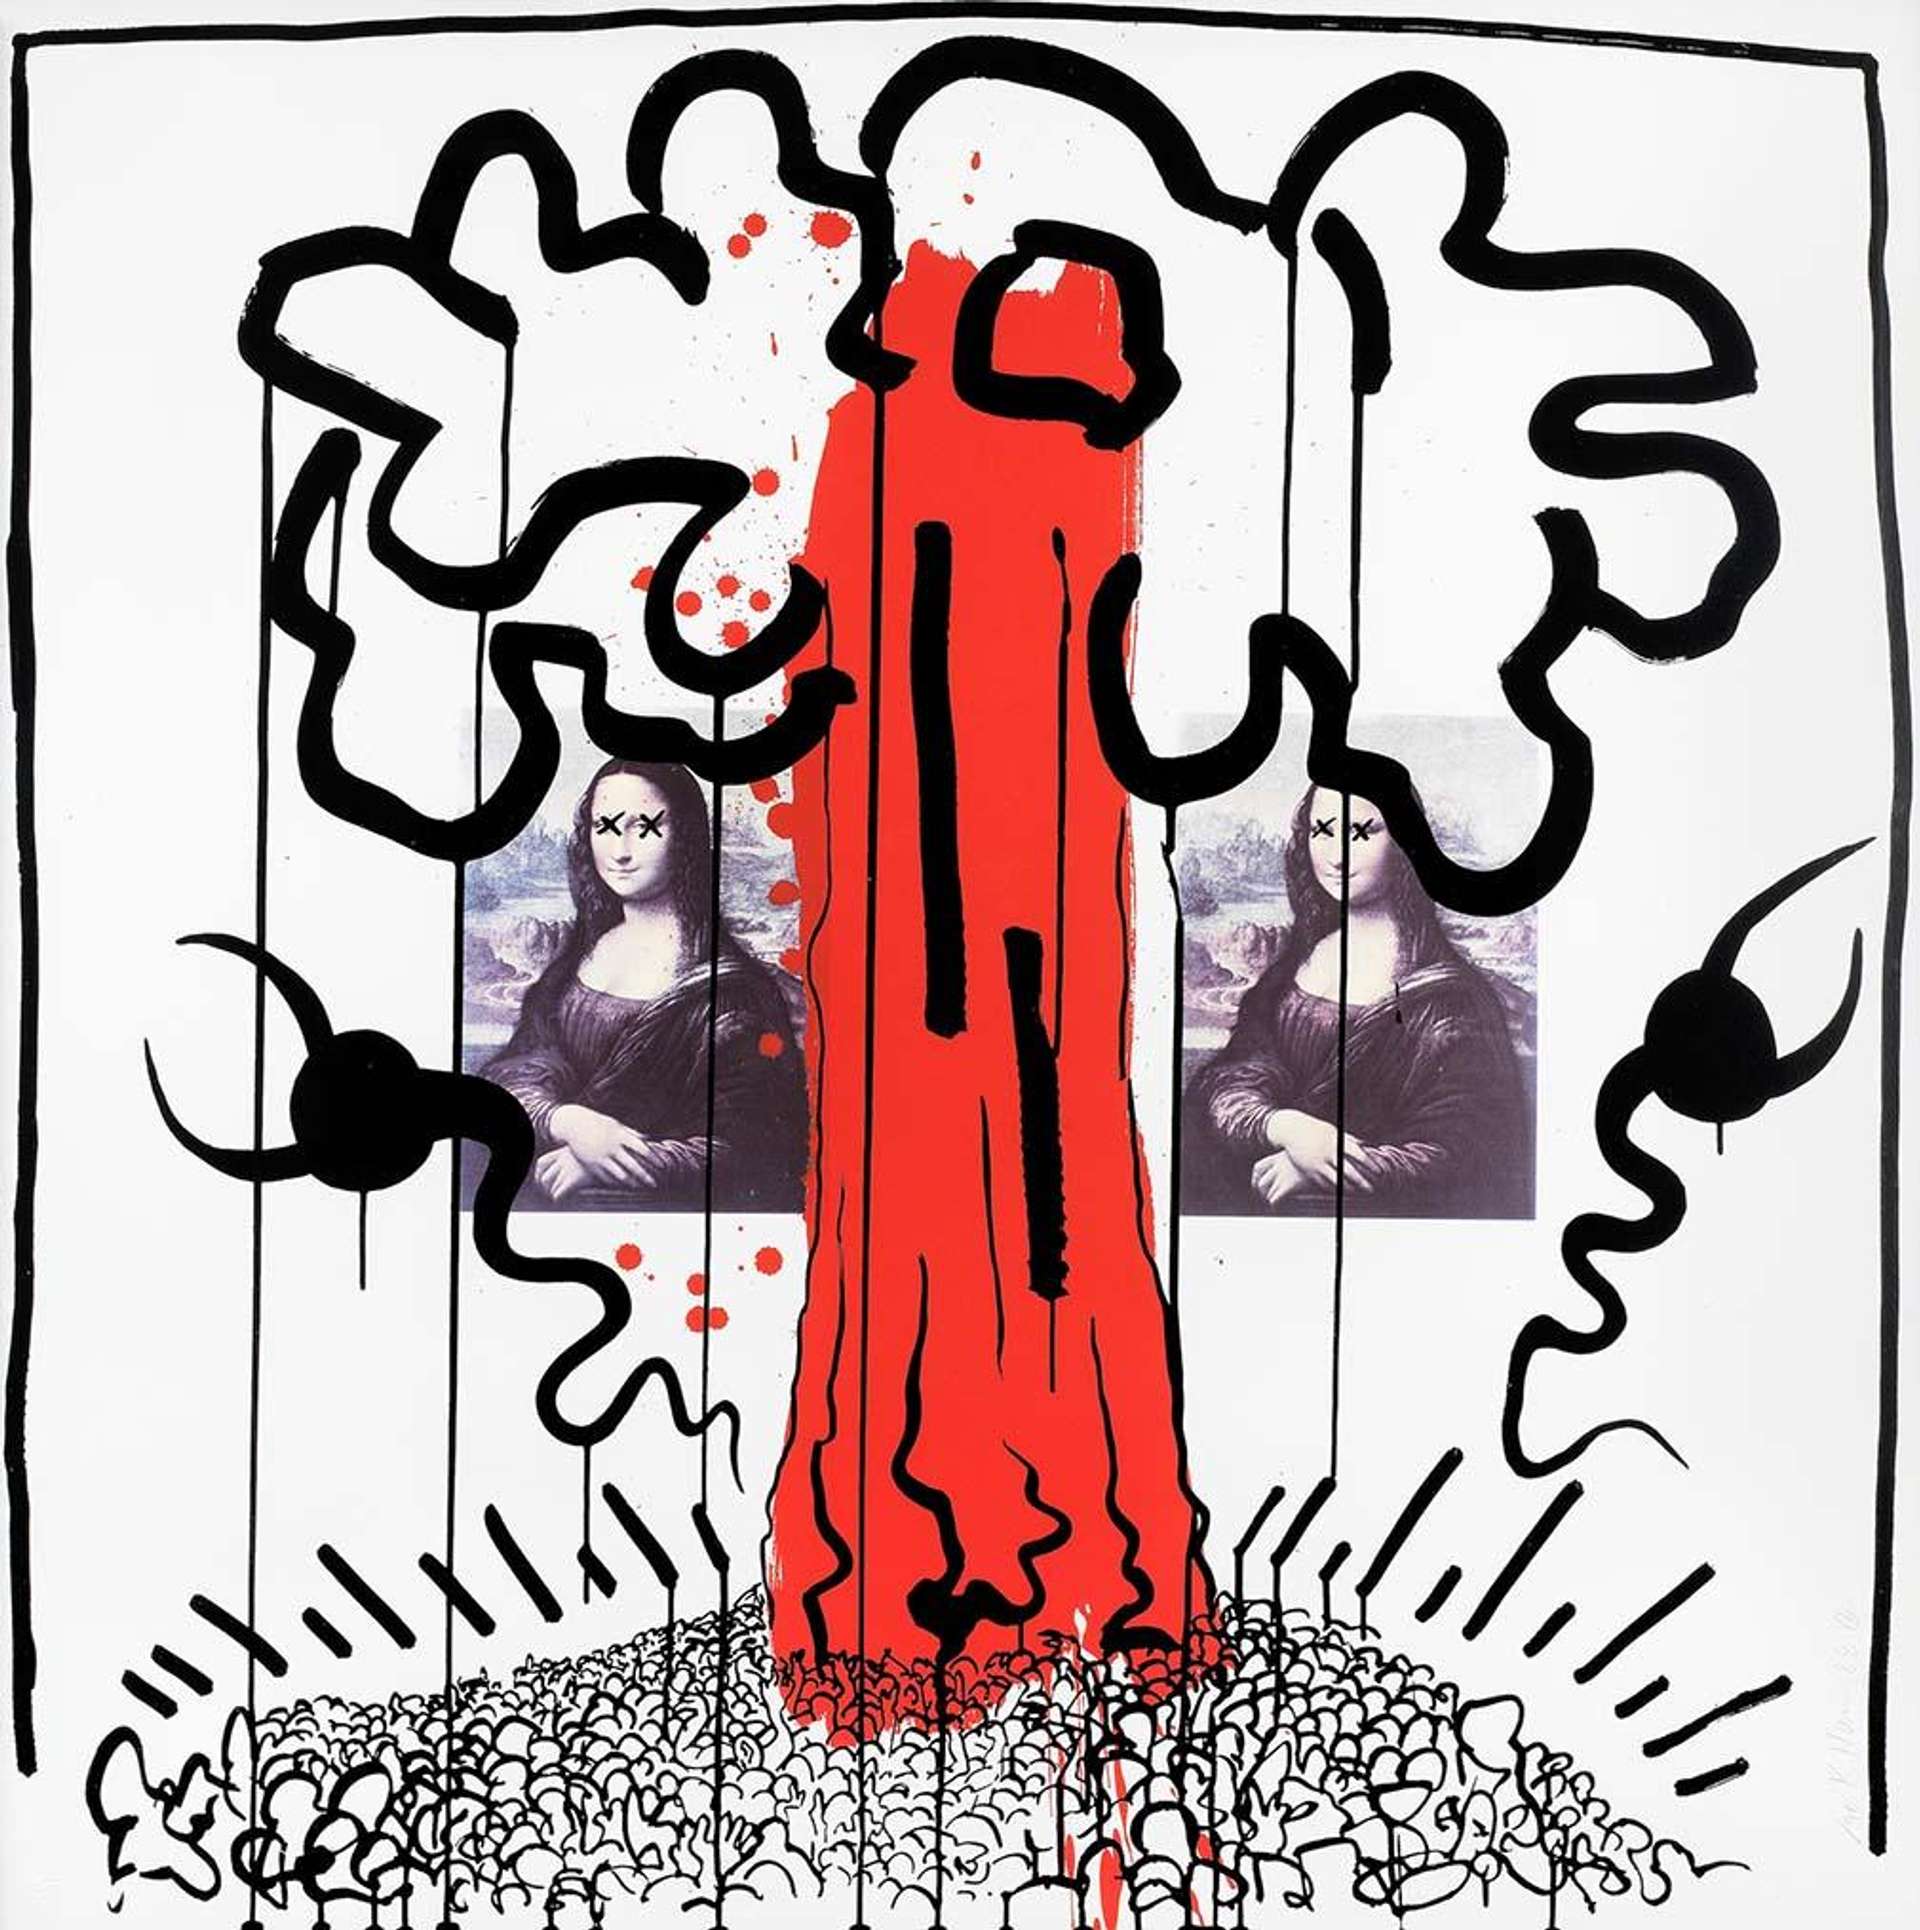 Keith Haring’s Apocalypse 1. A Pop Art screenprint of a towering red phallus between two depictions of Mona Lisa.  